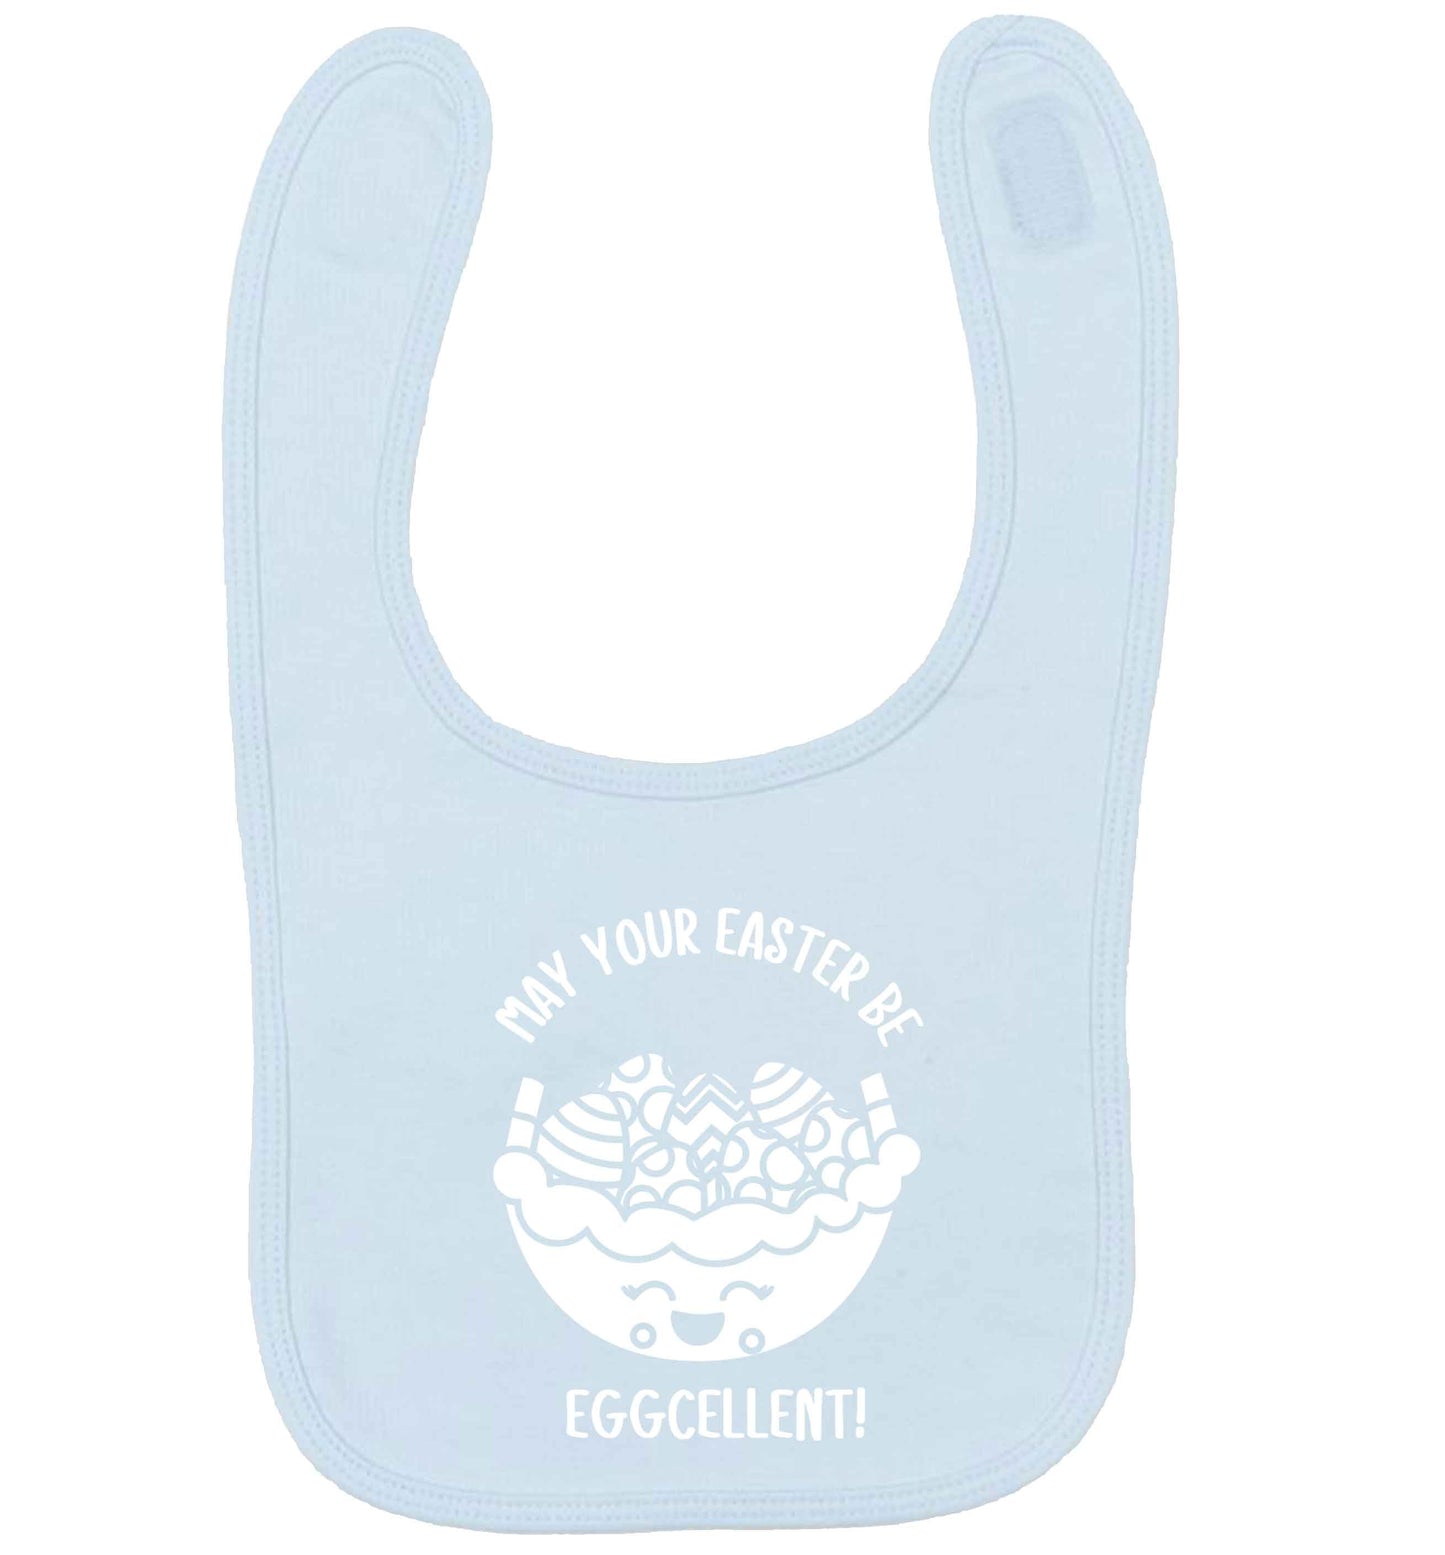 May your Easter be eggcellent pale blue baby bib